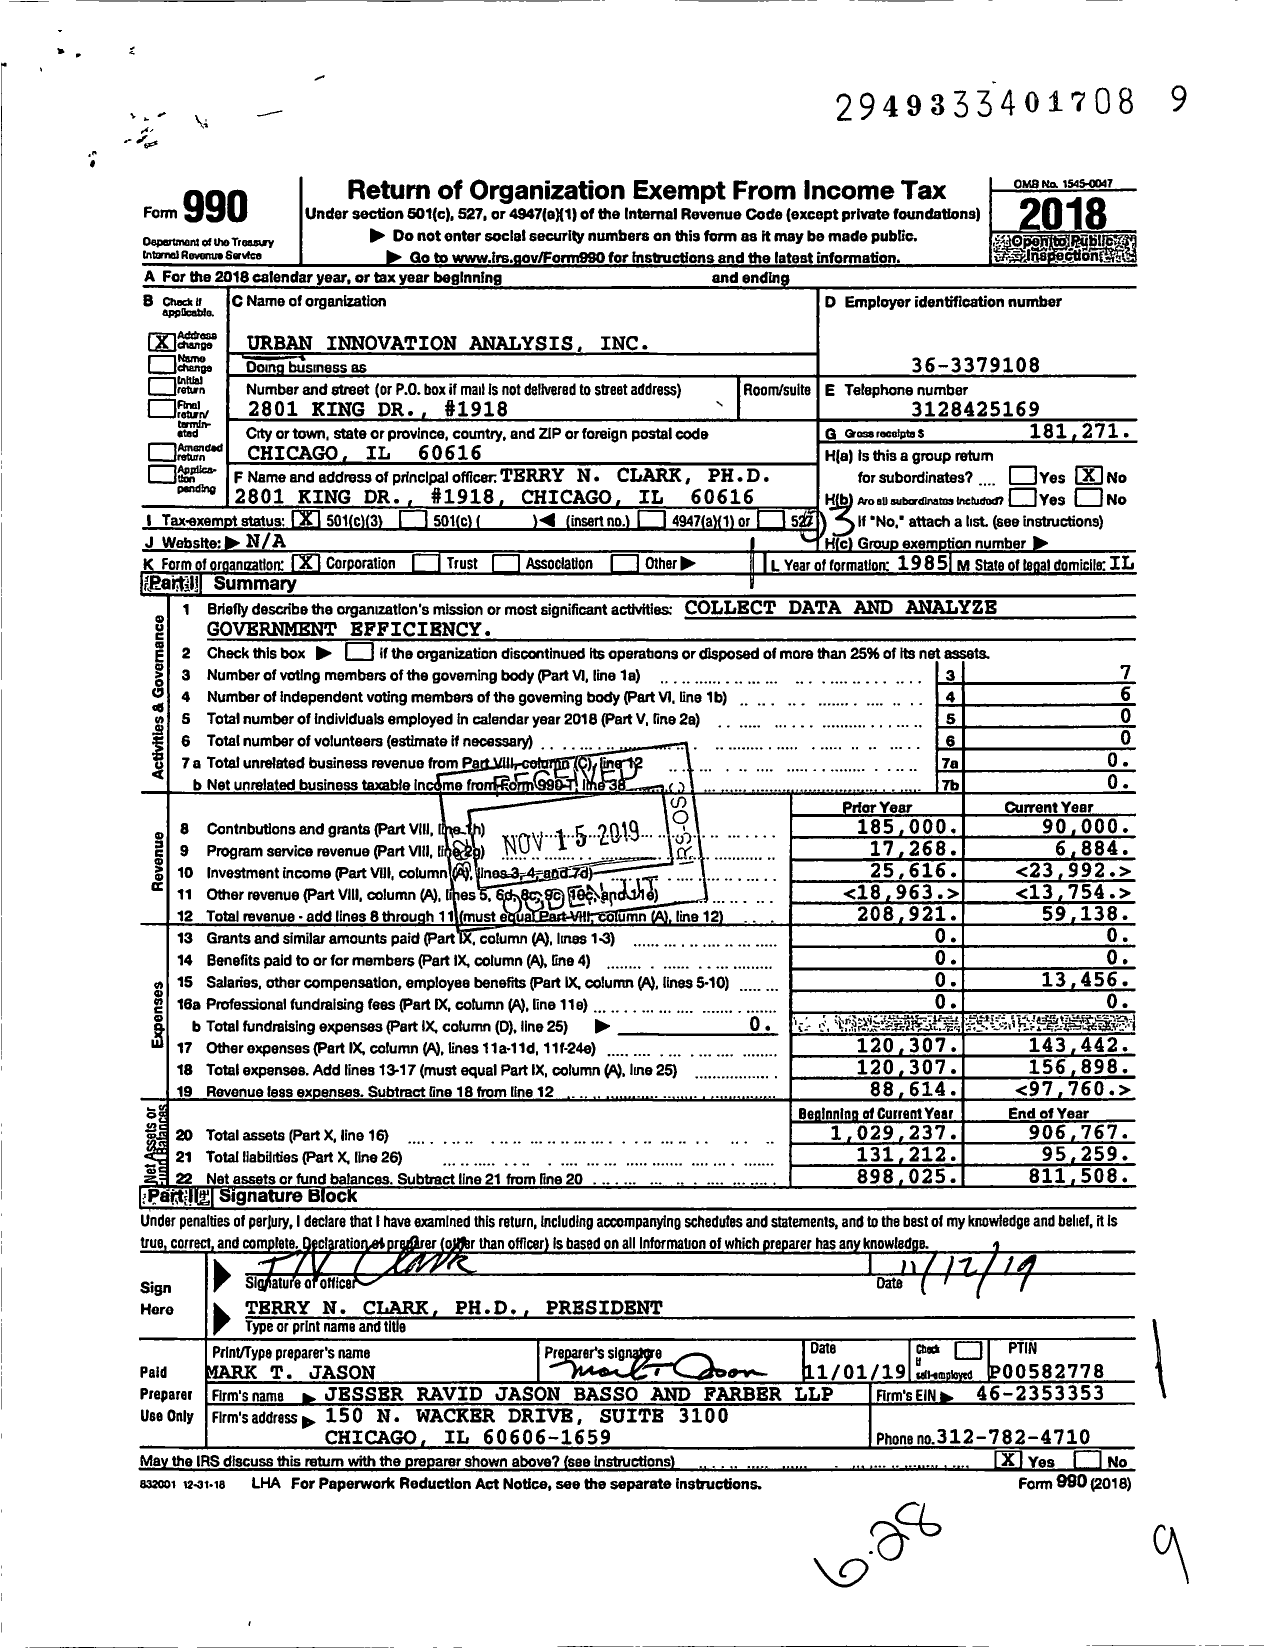 Image of first page of 2018 Form 990 for Urban Innovation Analysis